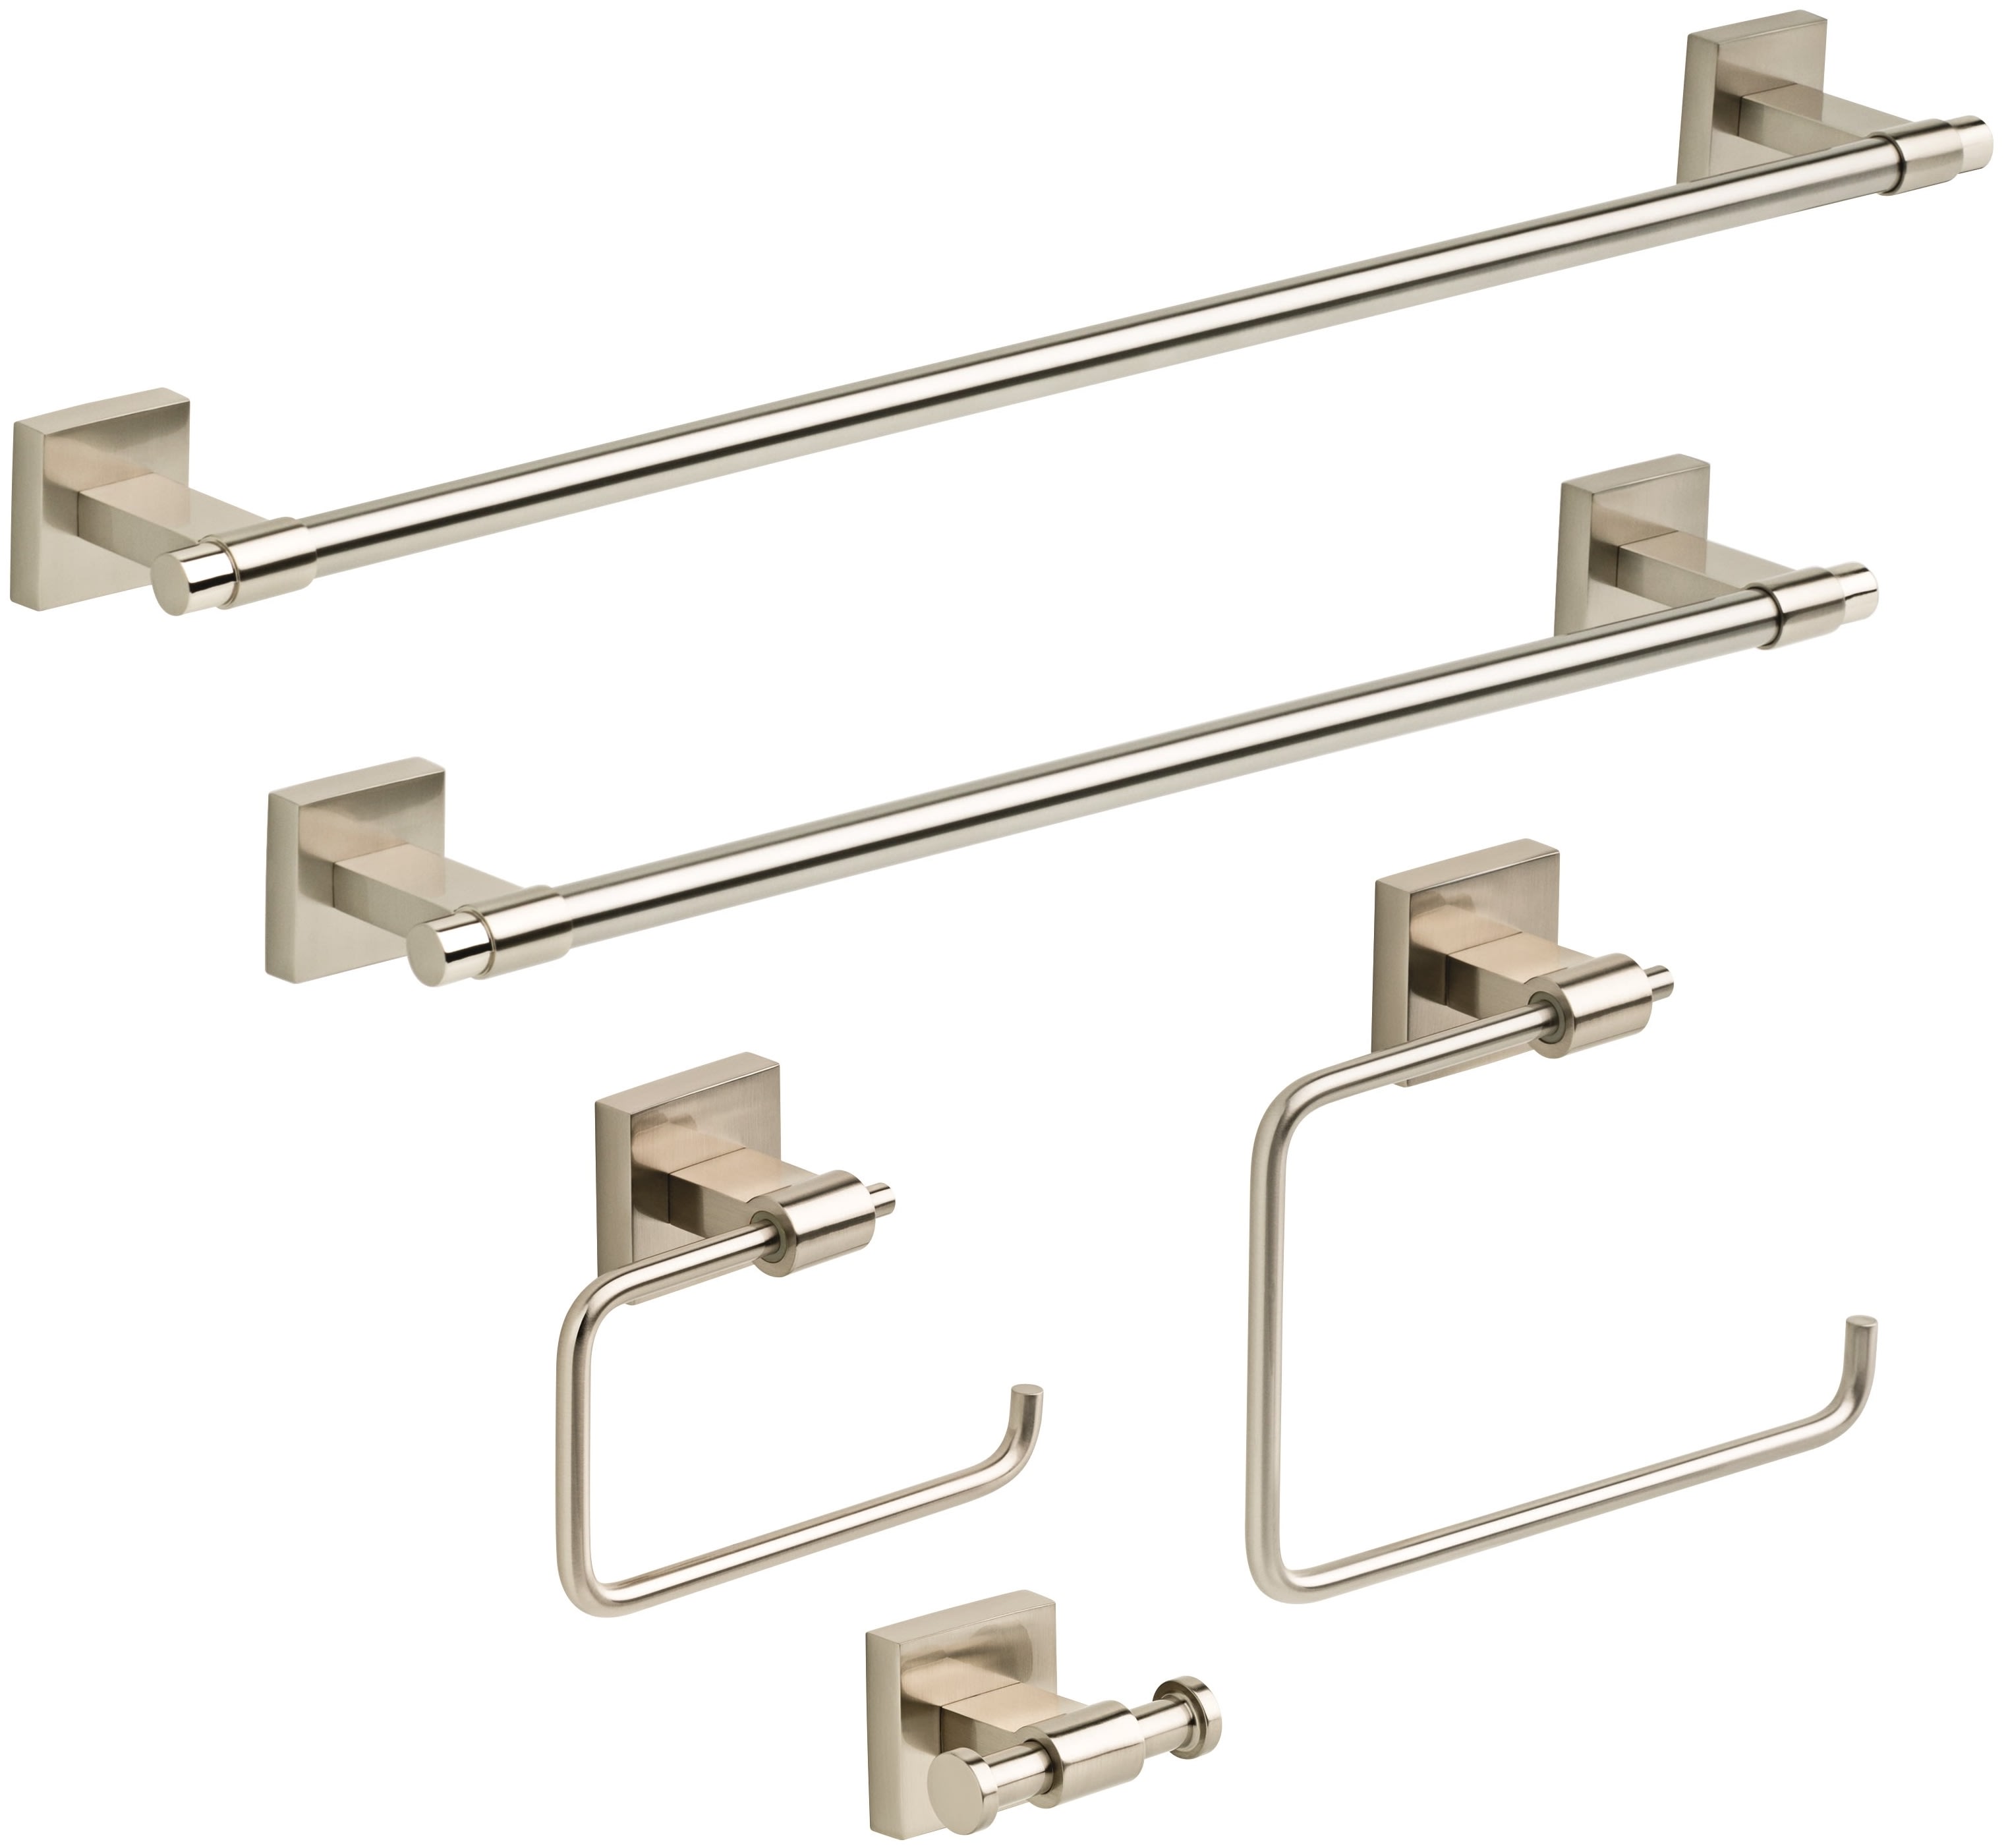 Franklin Brass MAX635-SN-KT Brushed Nickel Maxted 5 Piece Bathroom Package  with 24 and 18 Towel Bars, Towel Ring, Toilet Paper Holder and Robe Hook  